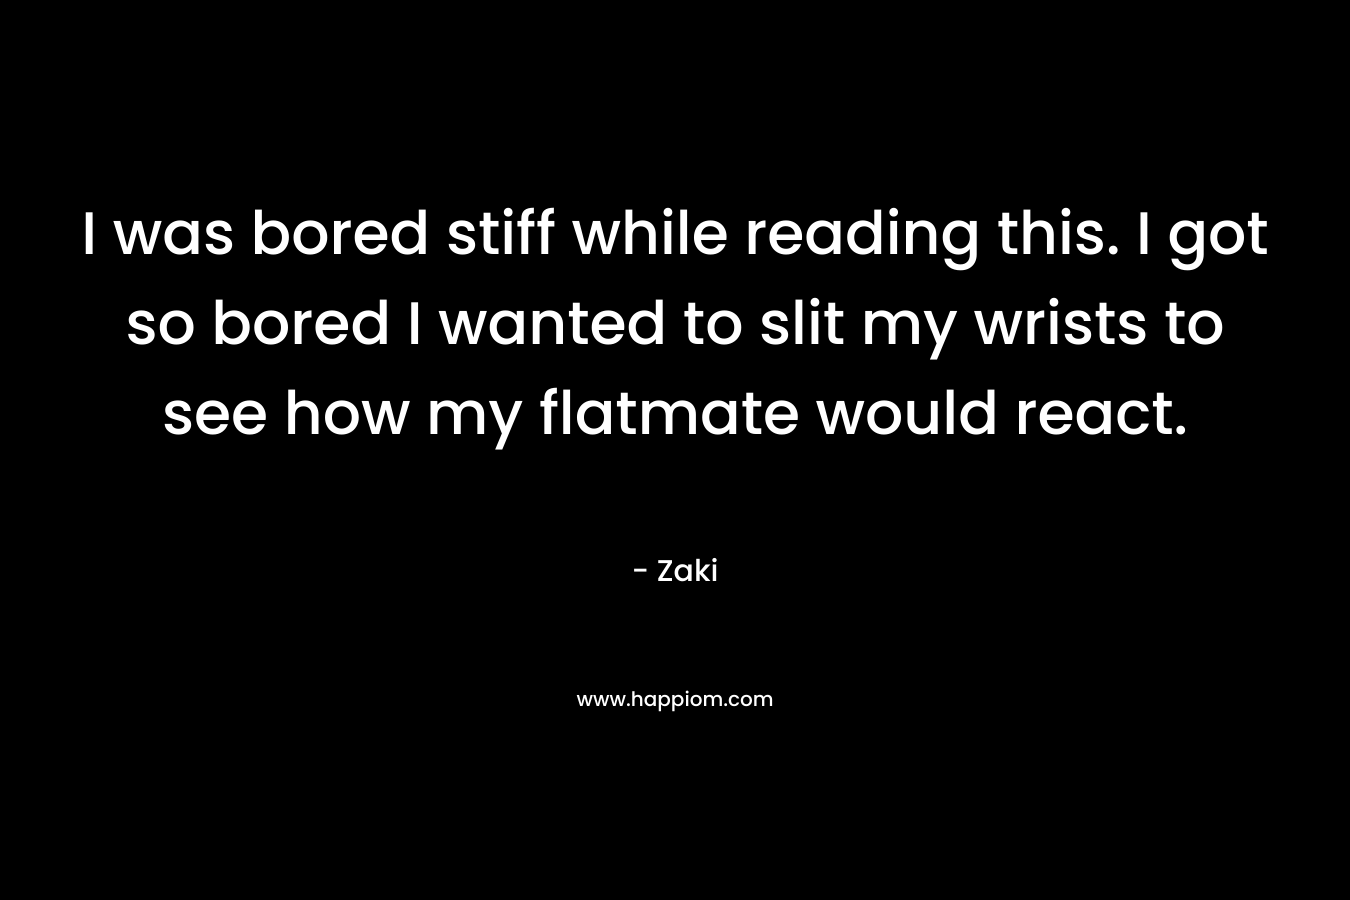 I was bored stiff while reading this. I got so bored I wanted to slit my wrists to see how my flatmate would react. – Zaki